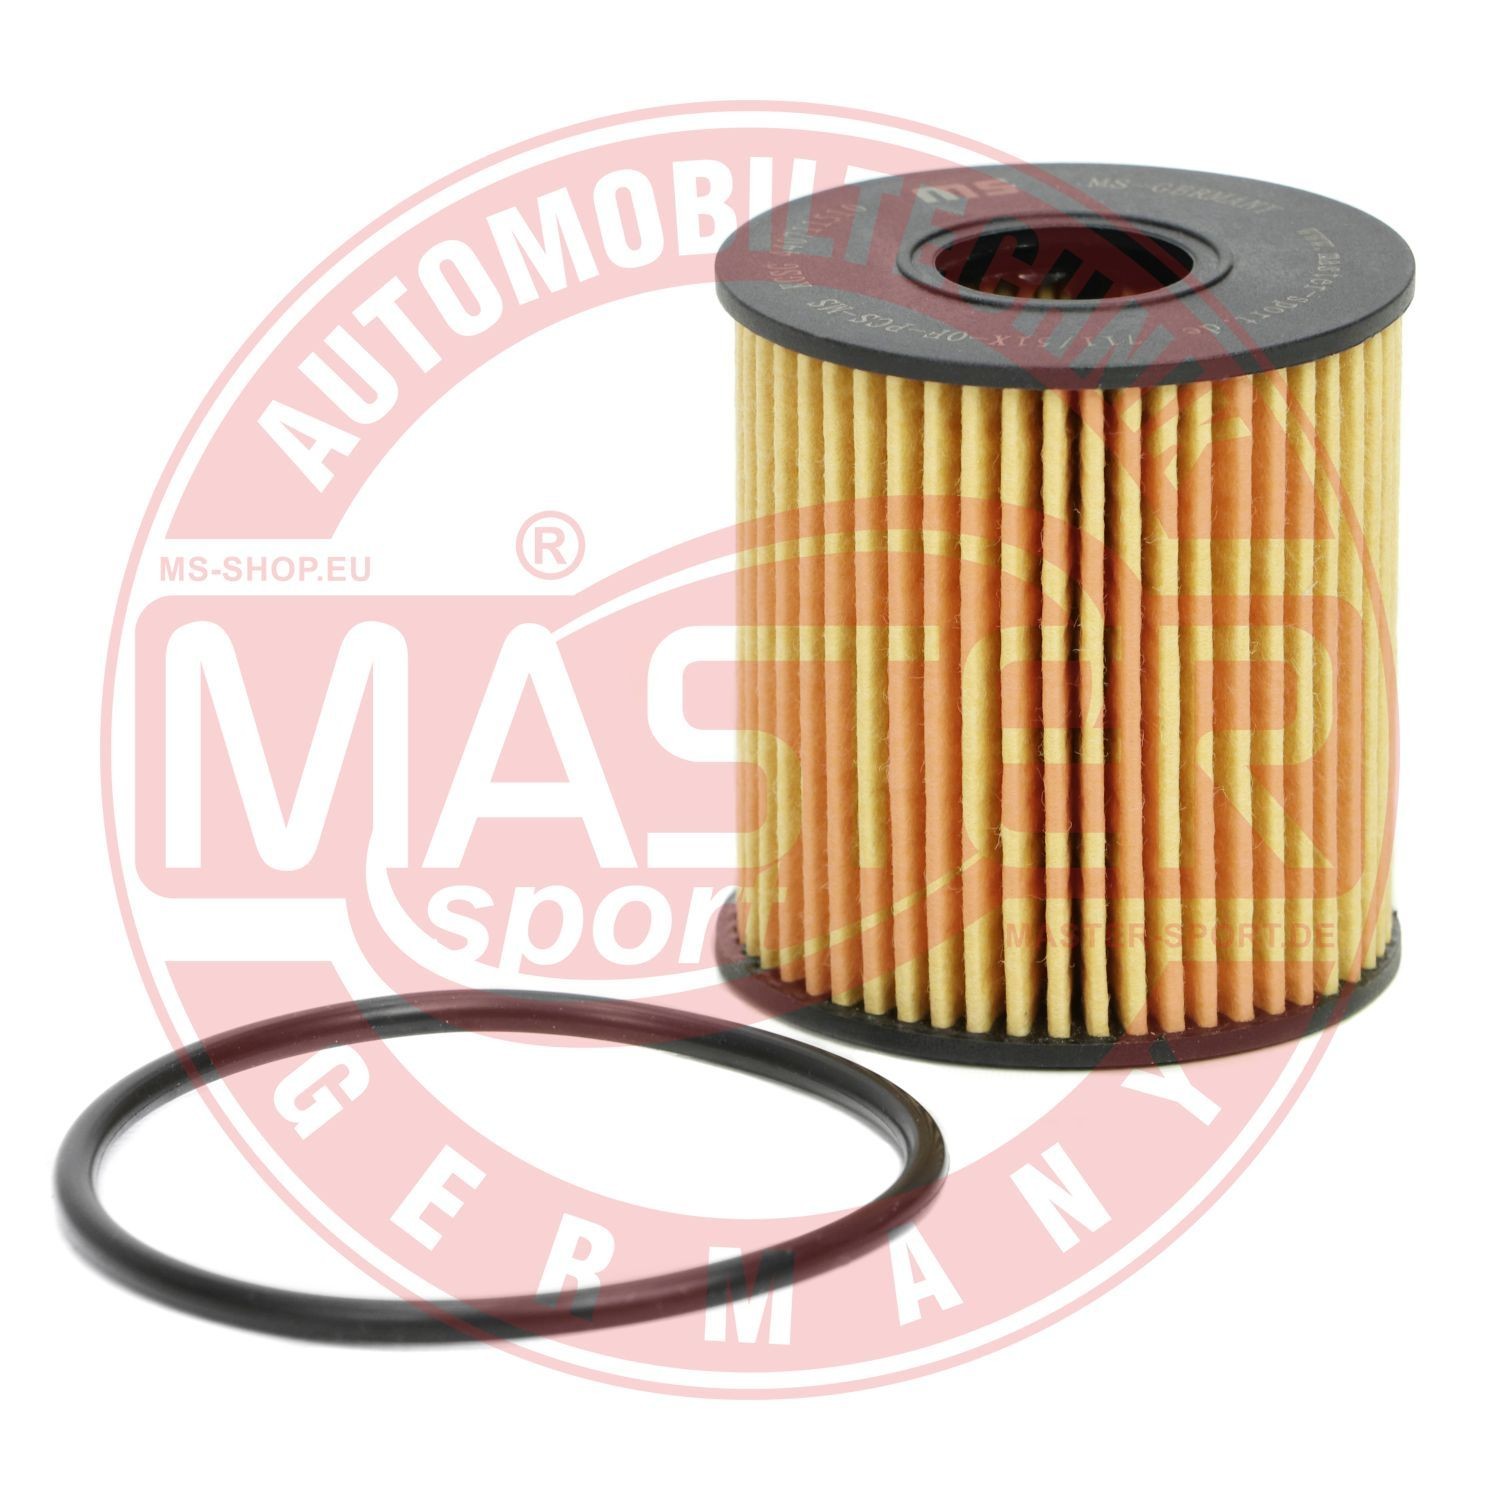 Ford MONDEO Oil filter 10151609 MASTER-SPORT 711/51X-OF-PCS-MS online buy